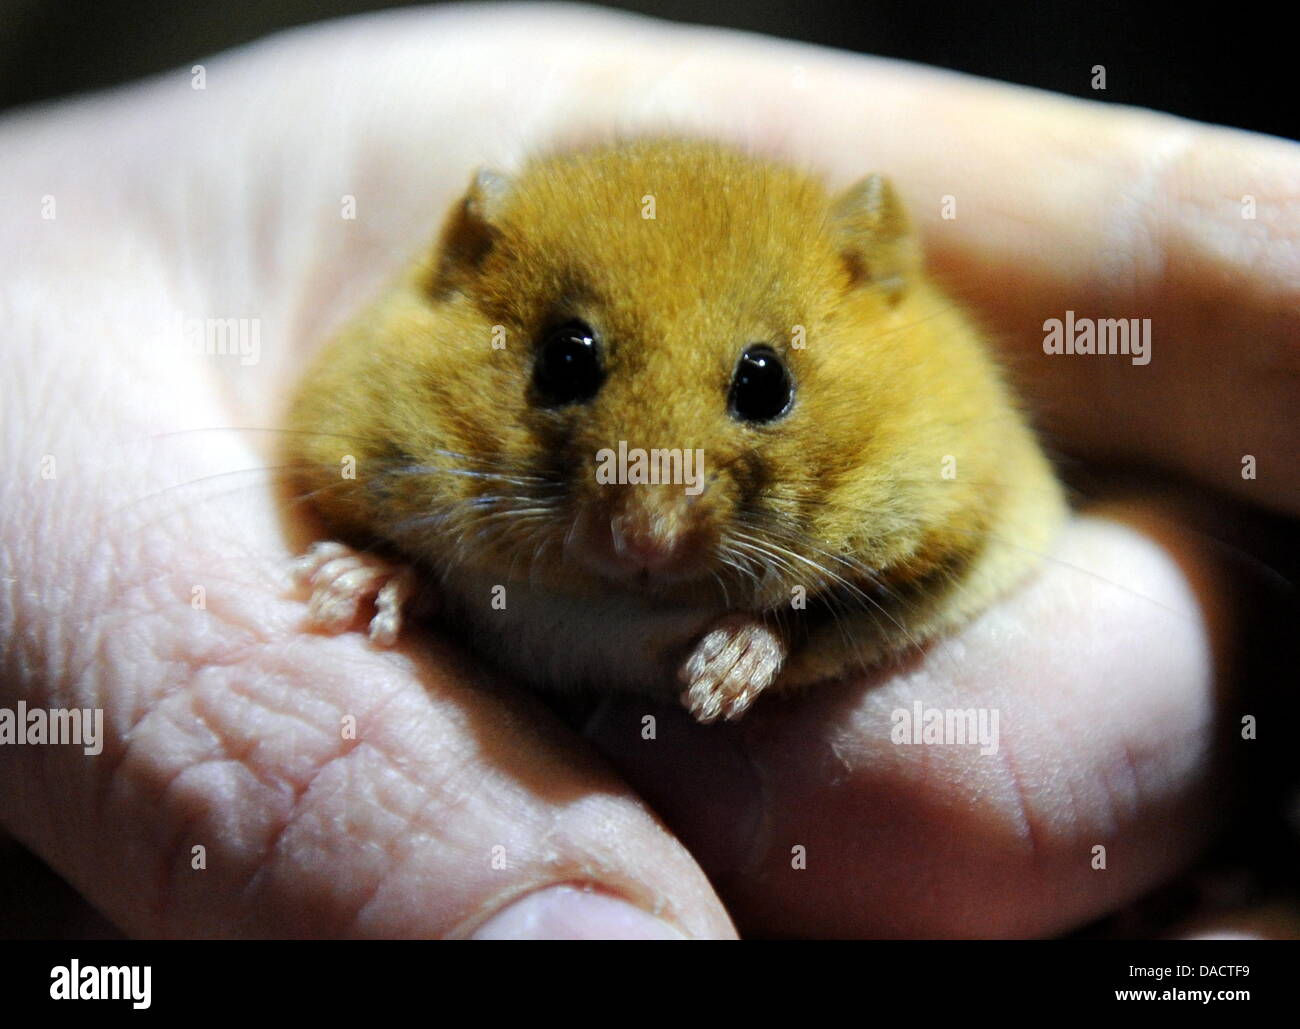 A small Hazel Dormouse (Muscardinus avellanarius) sits in the hand of a person at the wildlife park Eekholt, Germany, 15 December 2011. A breeding station shall be erected for the endagered animals at the wildlife park in Eekholt. The rescue program is part of the German-Danish project 'BioGrenzKorr' of the park and the foundation Naturschutz and is funded by the EU. Photo: CARSTEN Stock Photo